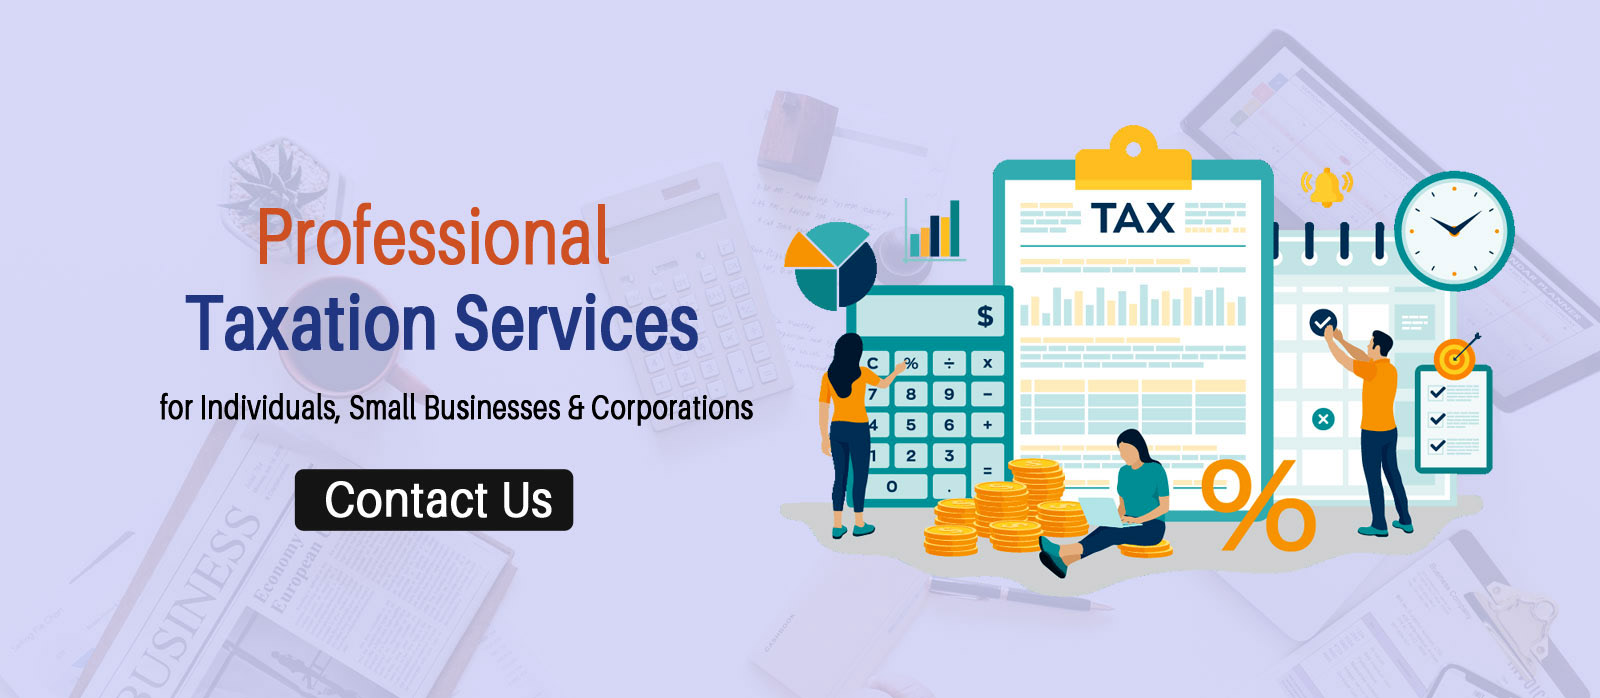 Taxation Services in Gurgaon